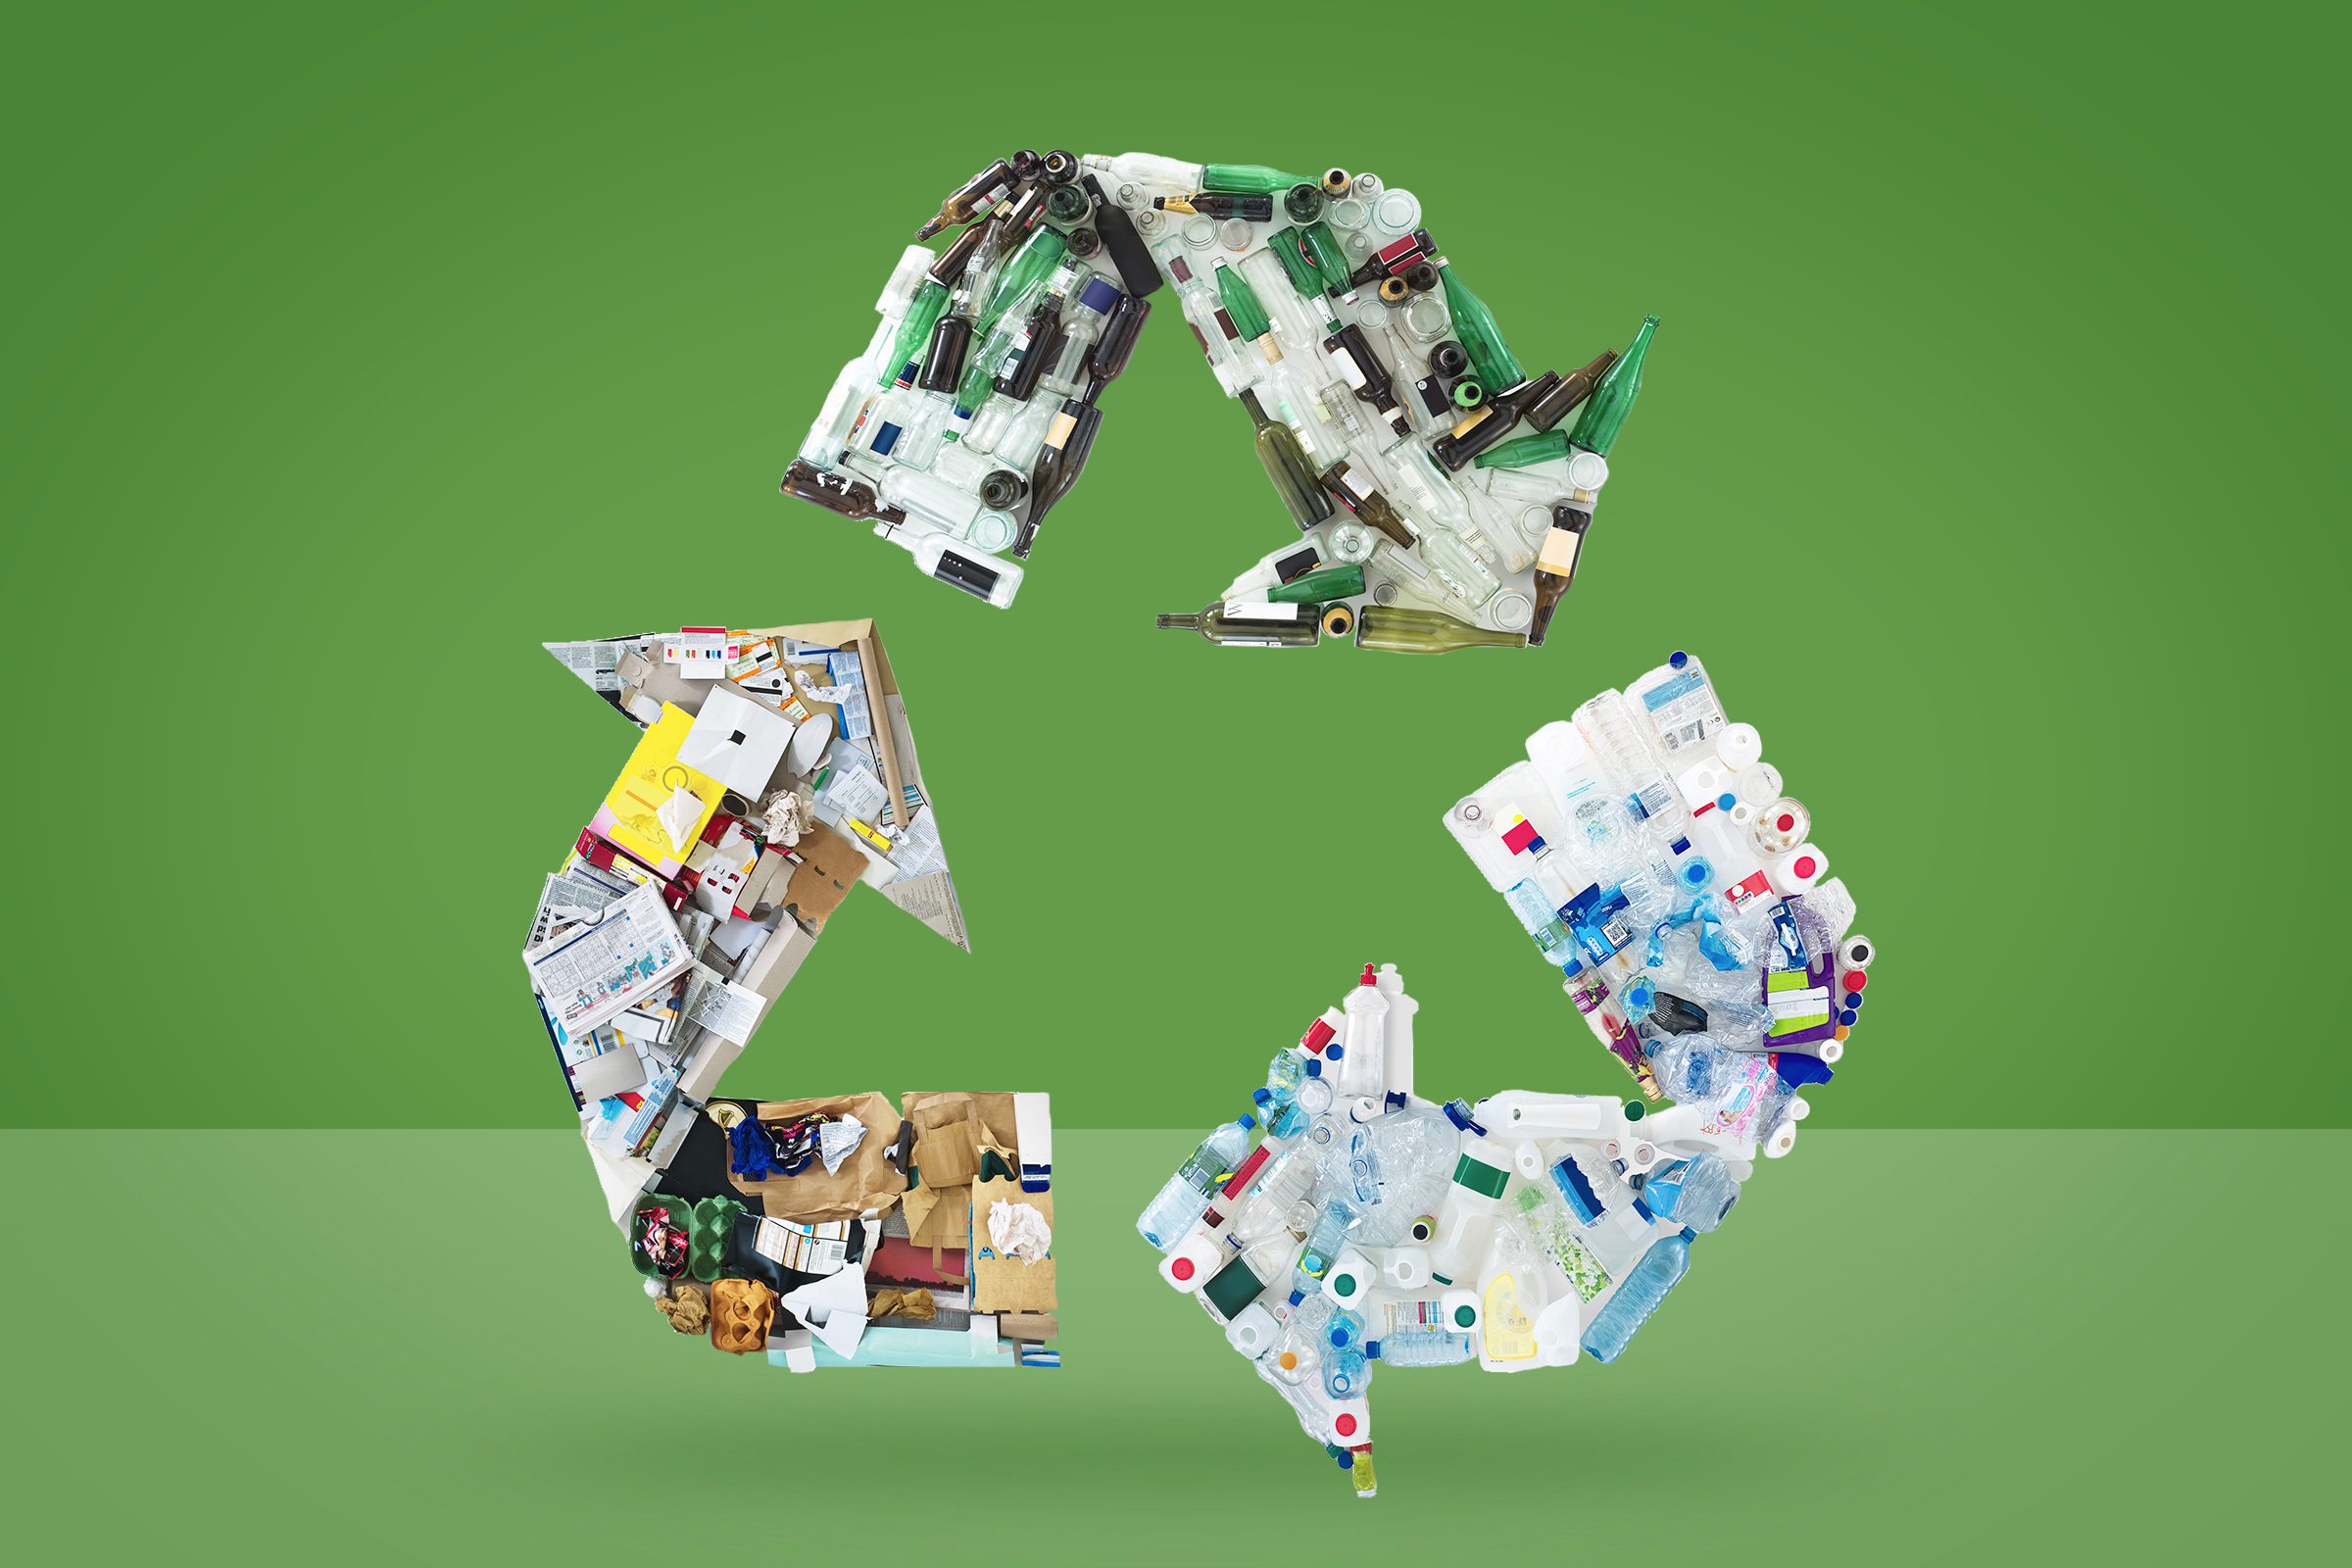 https://www.rd.com/wp-content/uploads/2022/06/The-Future-of-Recycling-FT-GettyImages-88962095.jpg?fit=700%2C1024